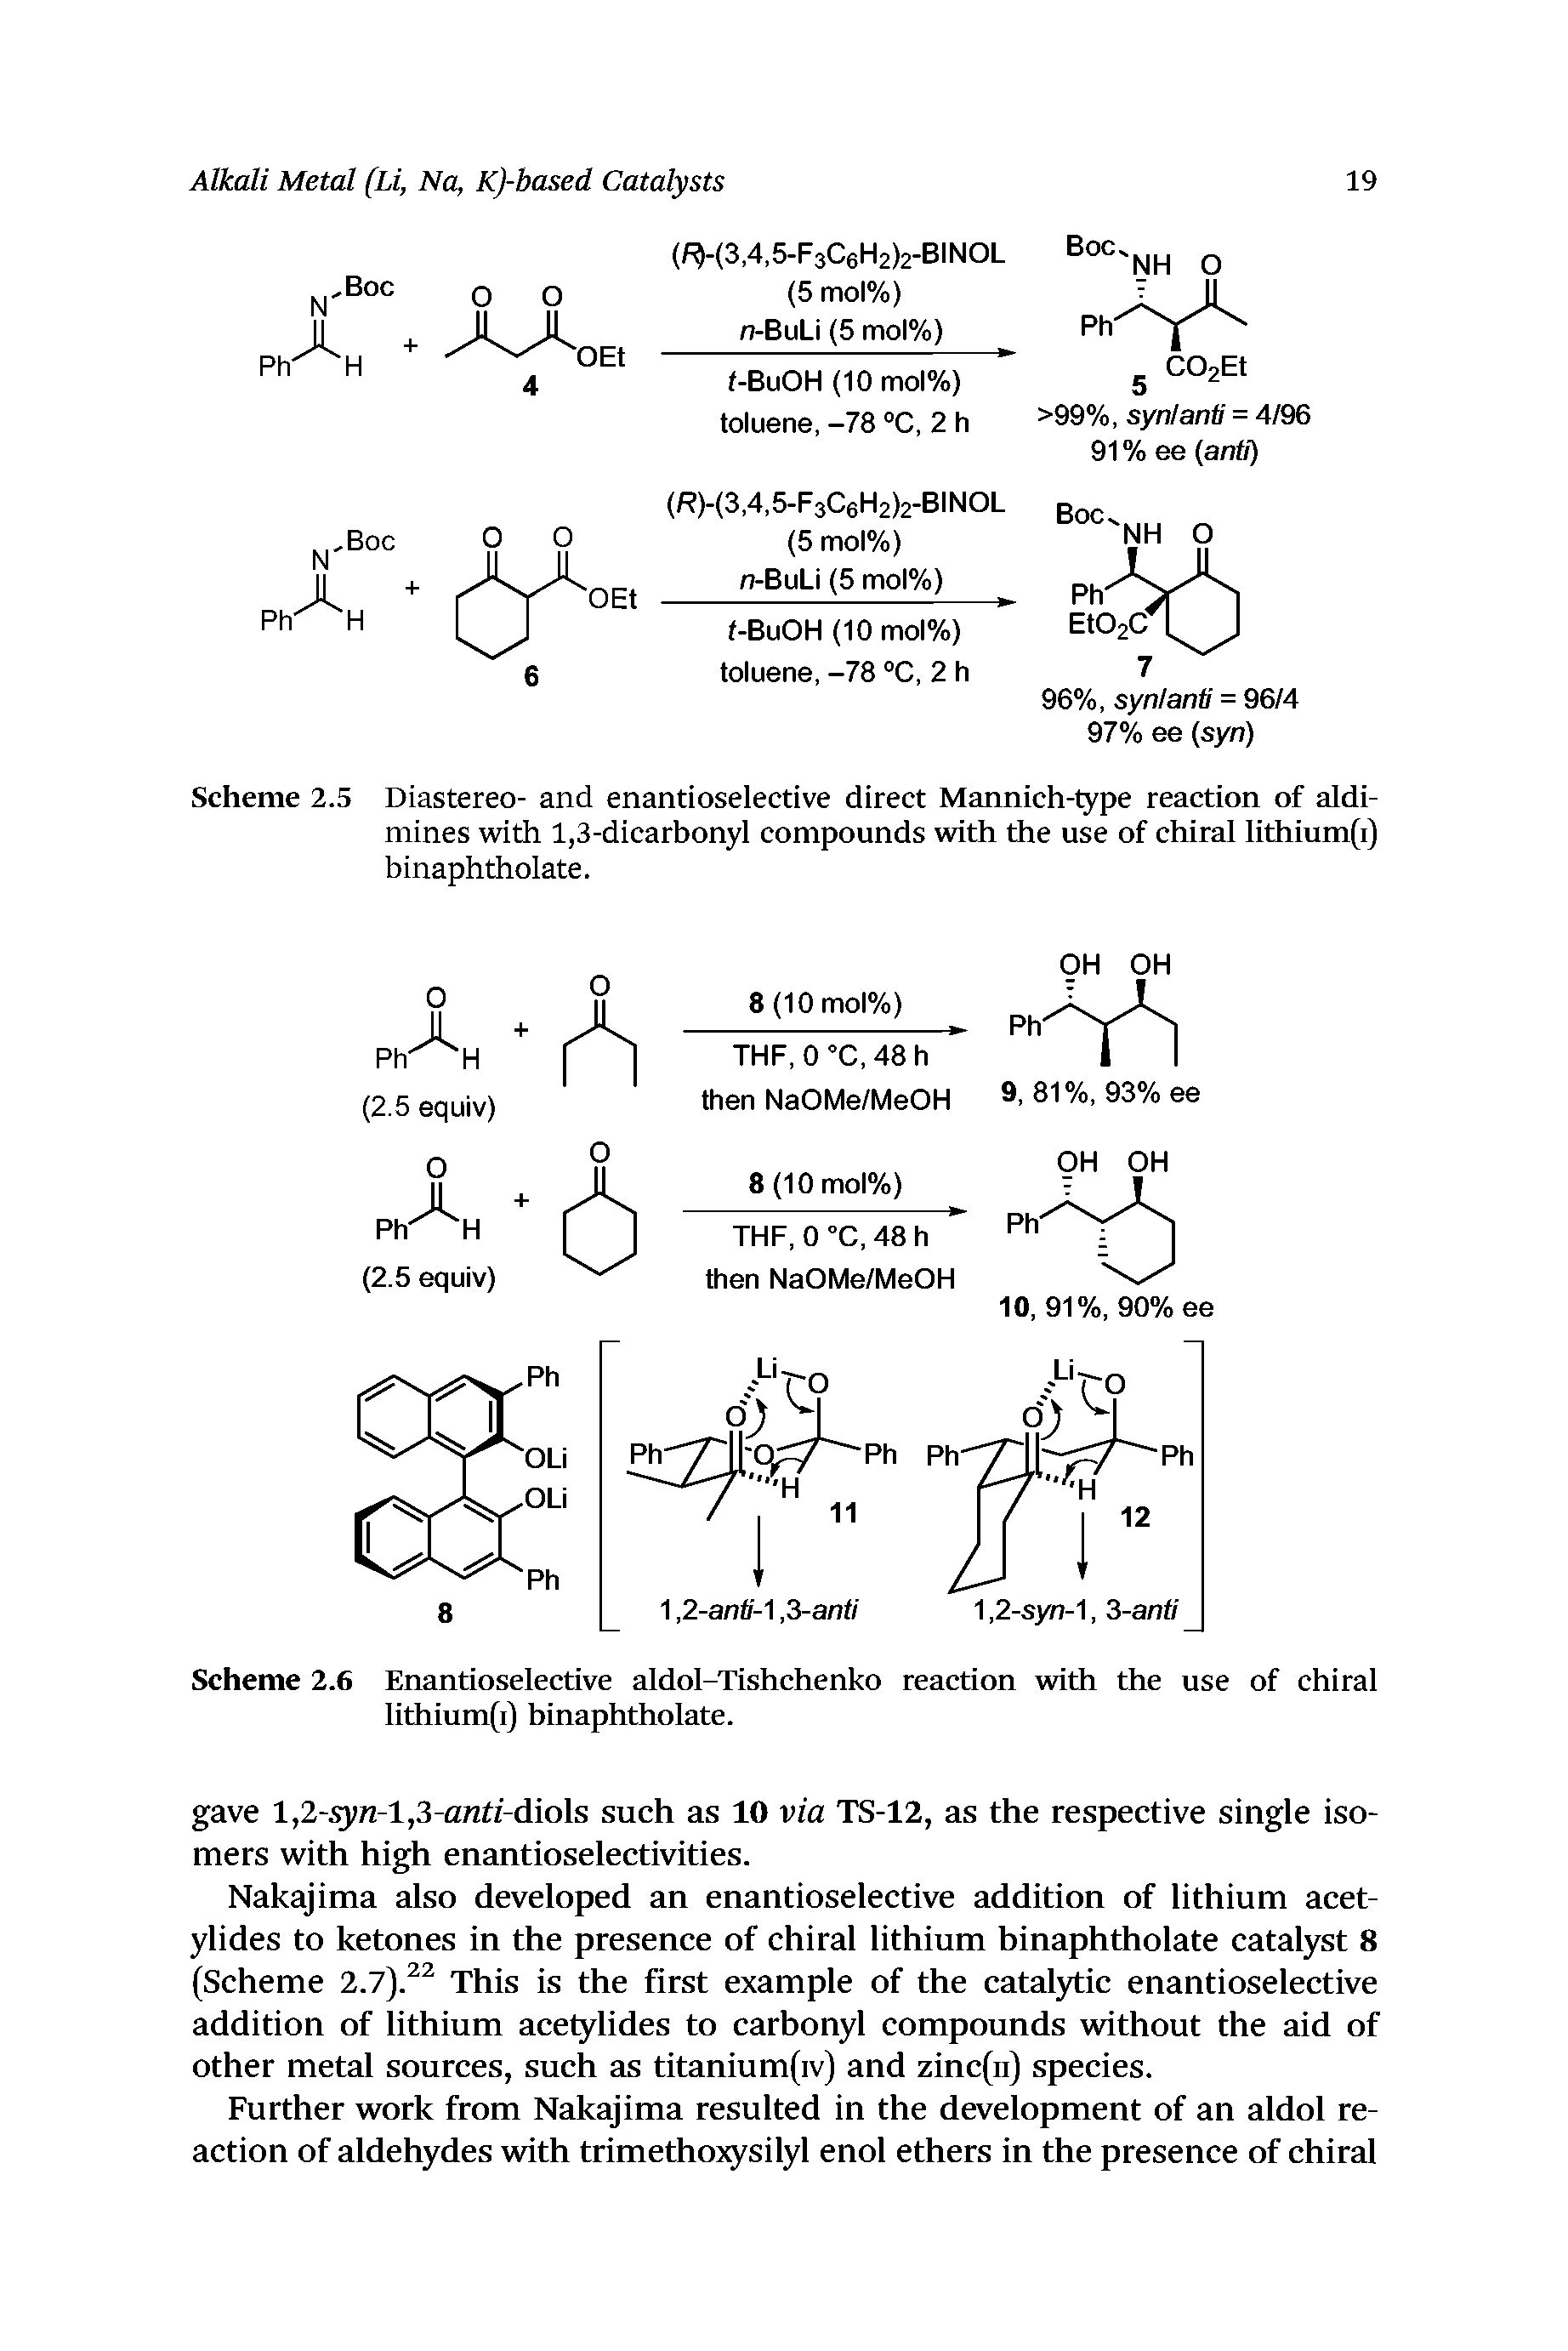 Scheme 2.5 Diastereo- and enantioselective direct Mannich-type reaction of aldi-mines with 1,3-dicarbonyl compounds with the use of chiral lithium(i) binaphtholate.